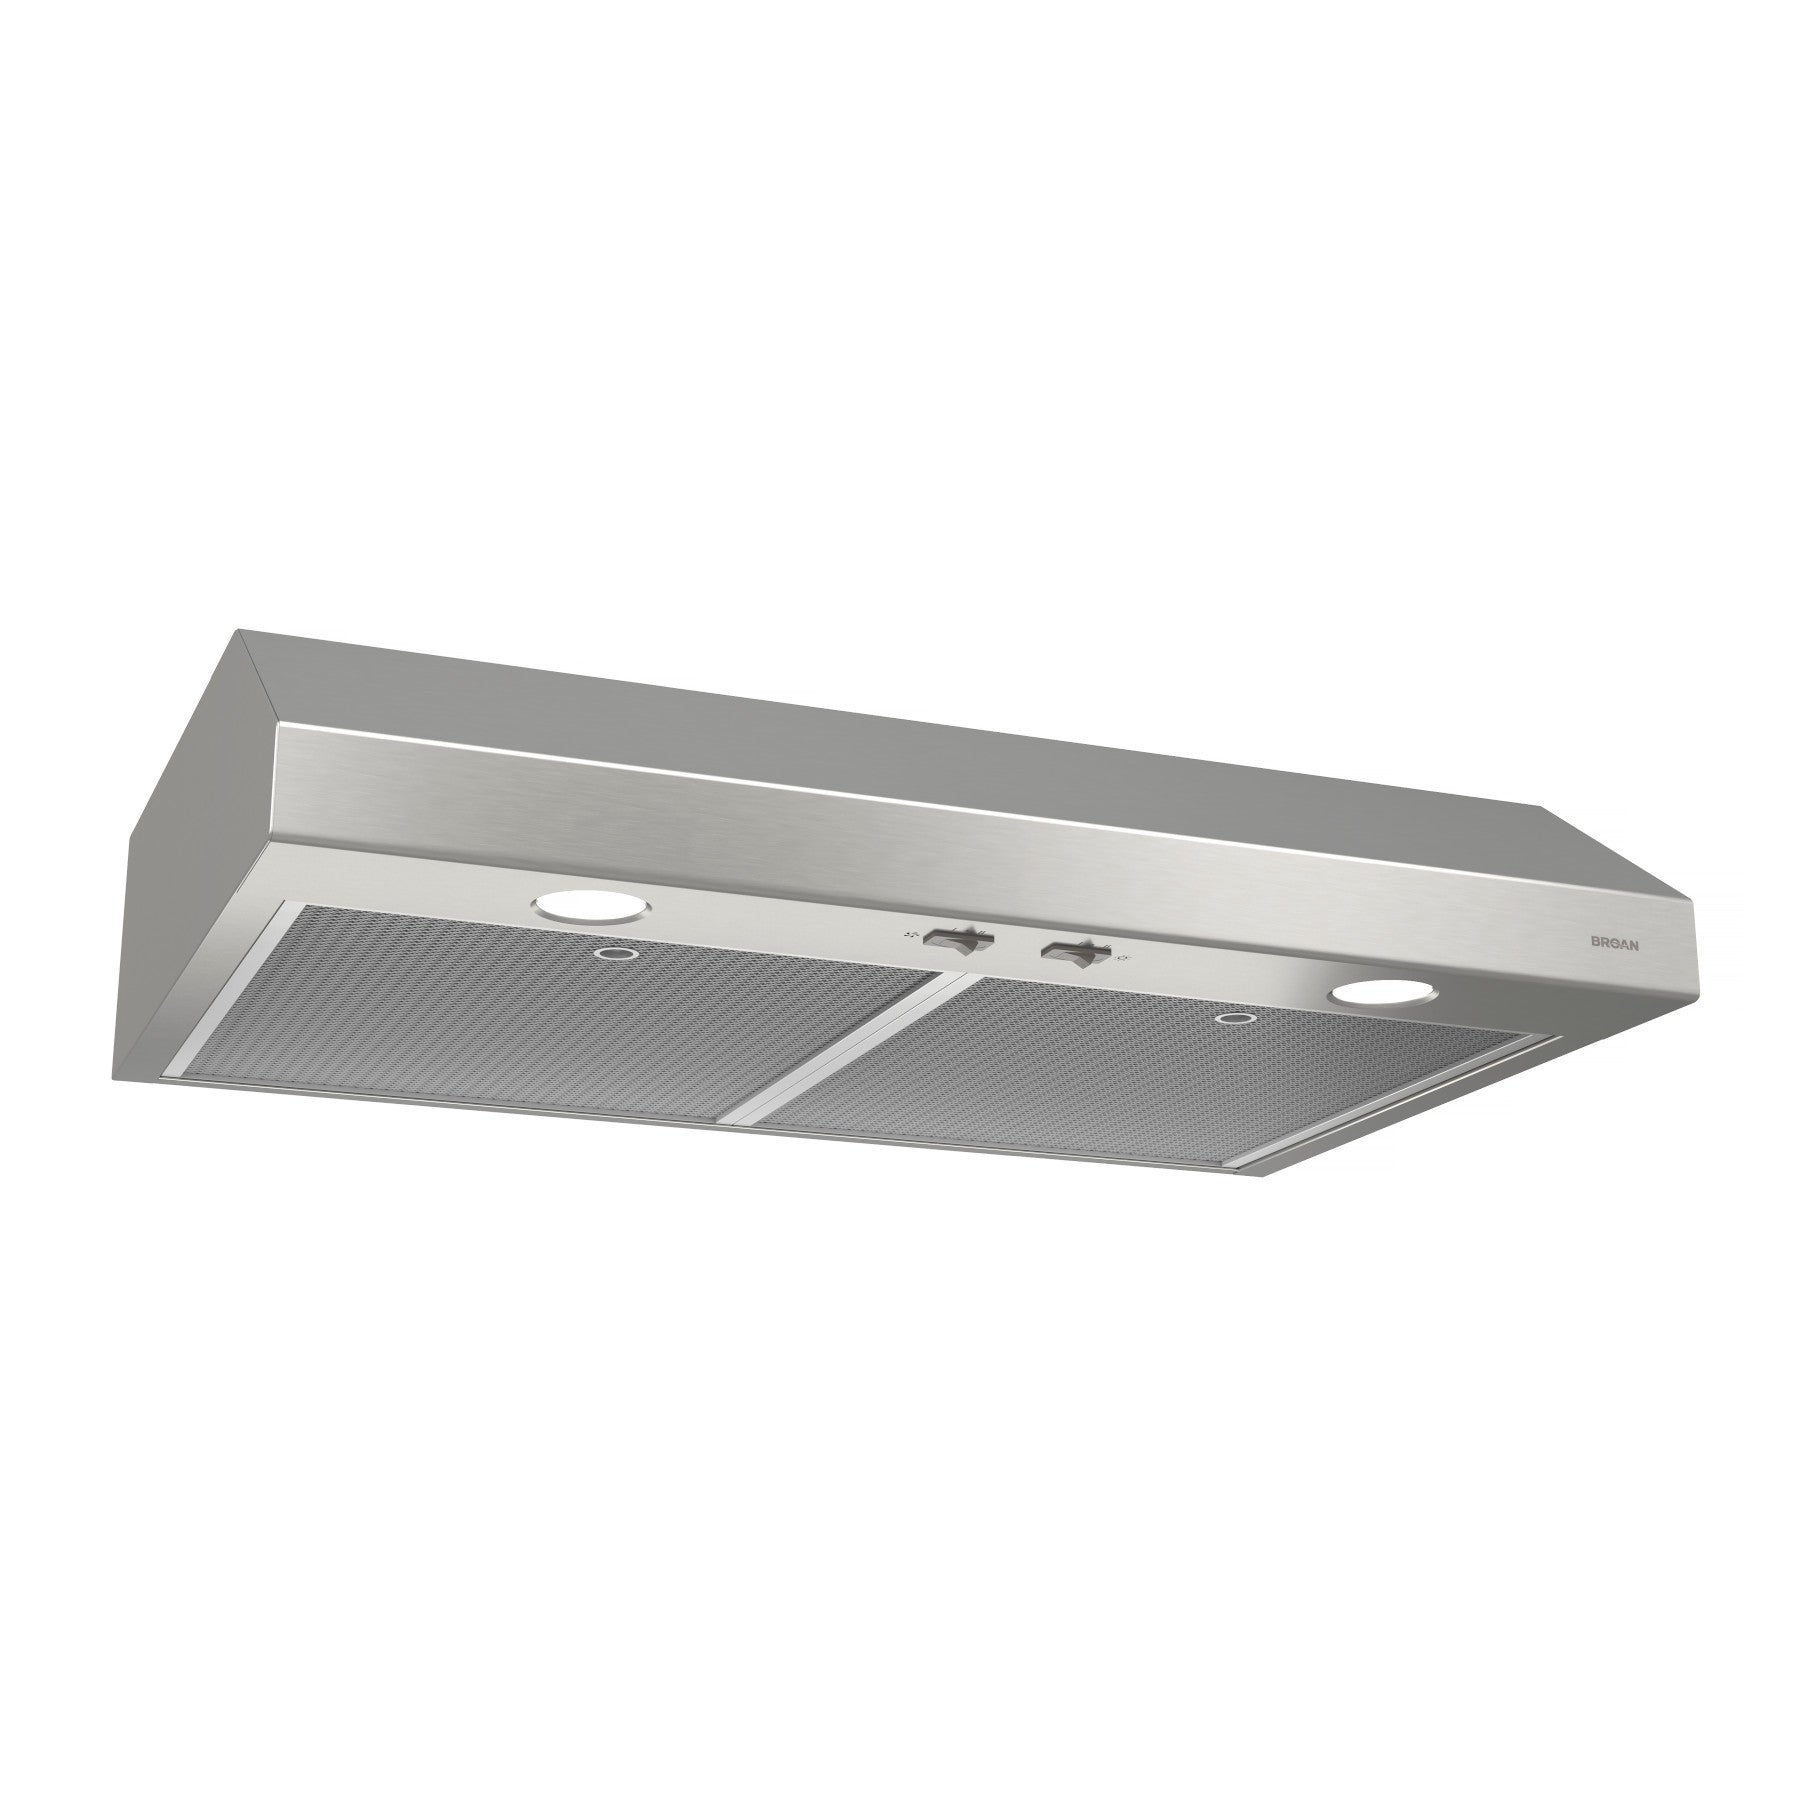 Broan - 24 Inch 300 CFM Under Cabinet Range Vent in Stainless - BCS324SSC